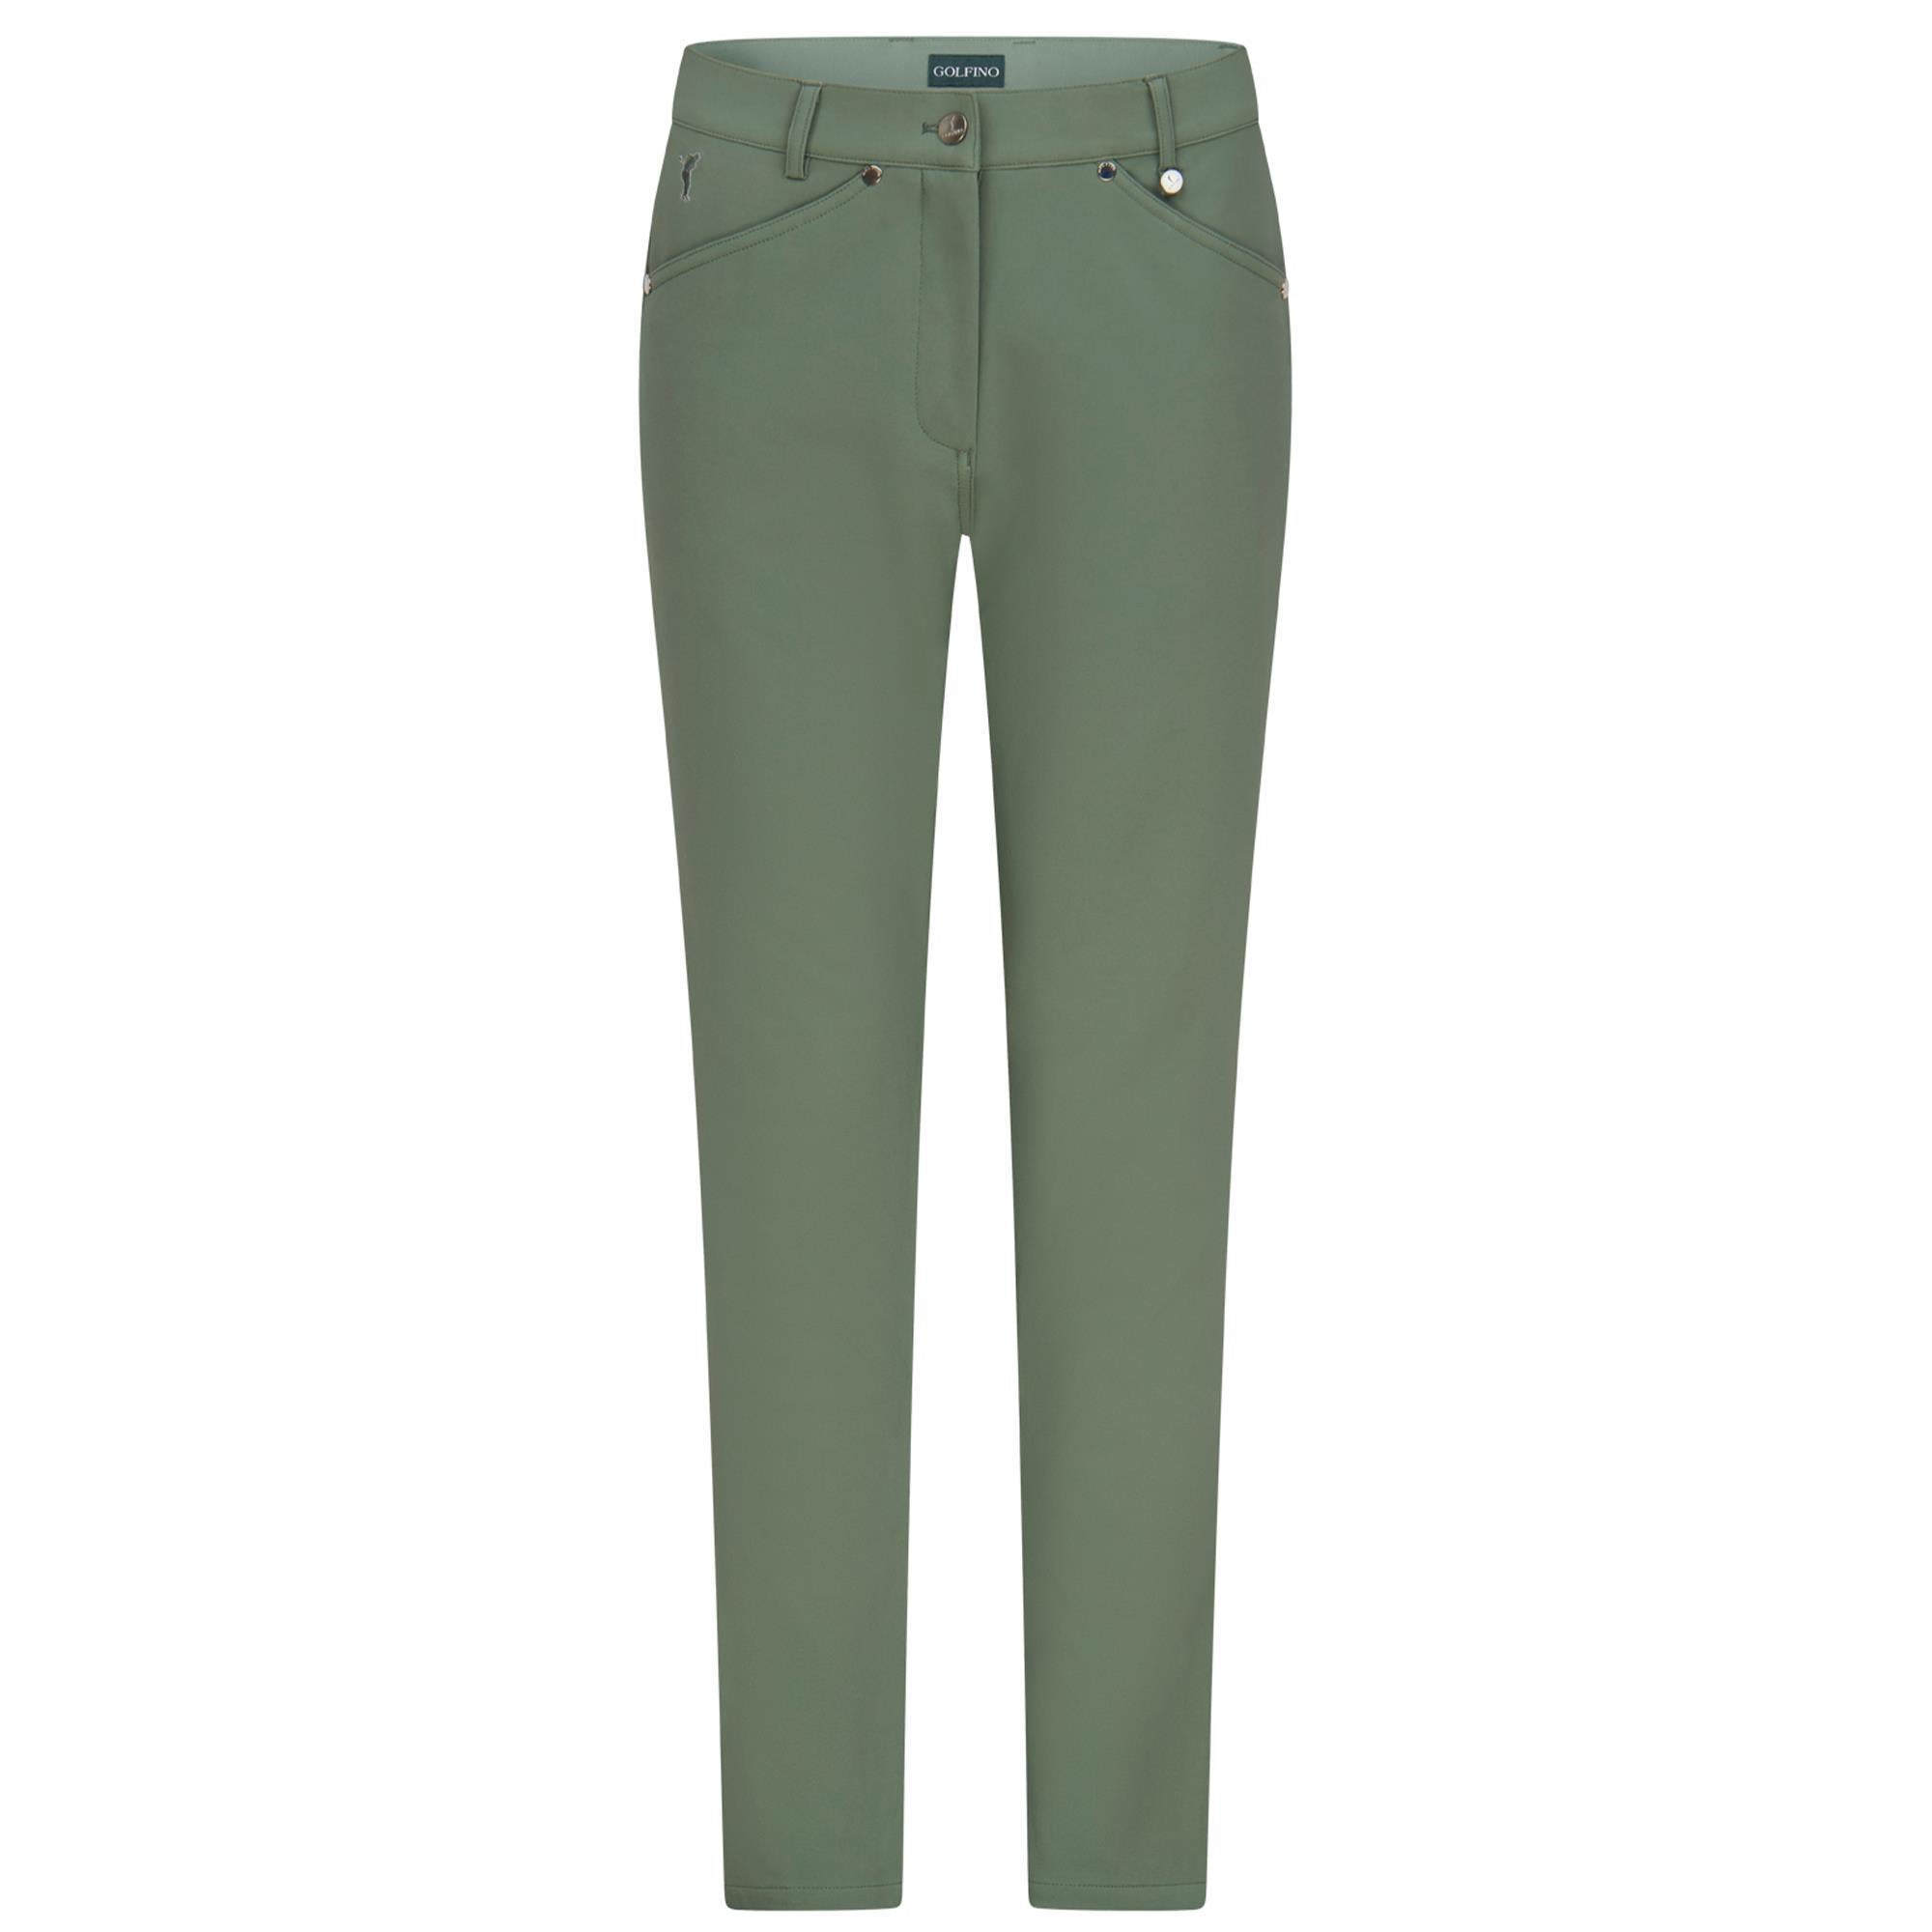 Ely-Fashion Slim Fit Men Gold Trousers - Buy Ely-Fashion Slim Fit Men Gold Trousers  Online at Best Prices in India | Flipkart.com